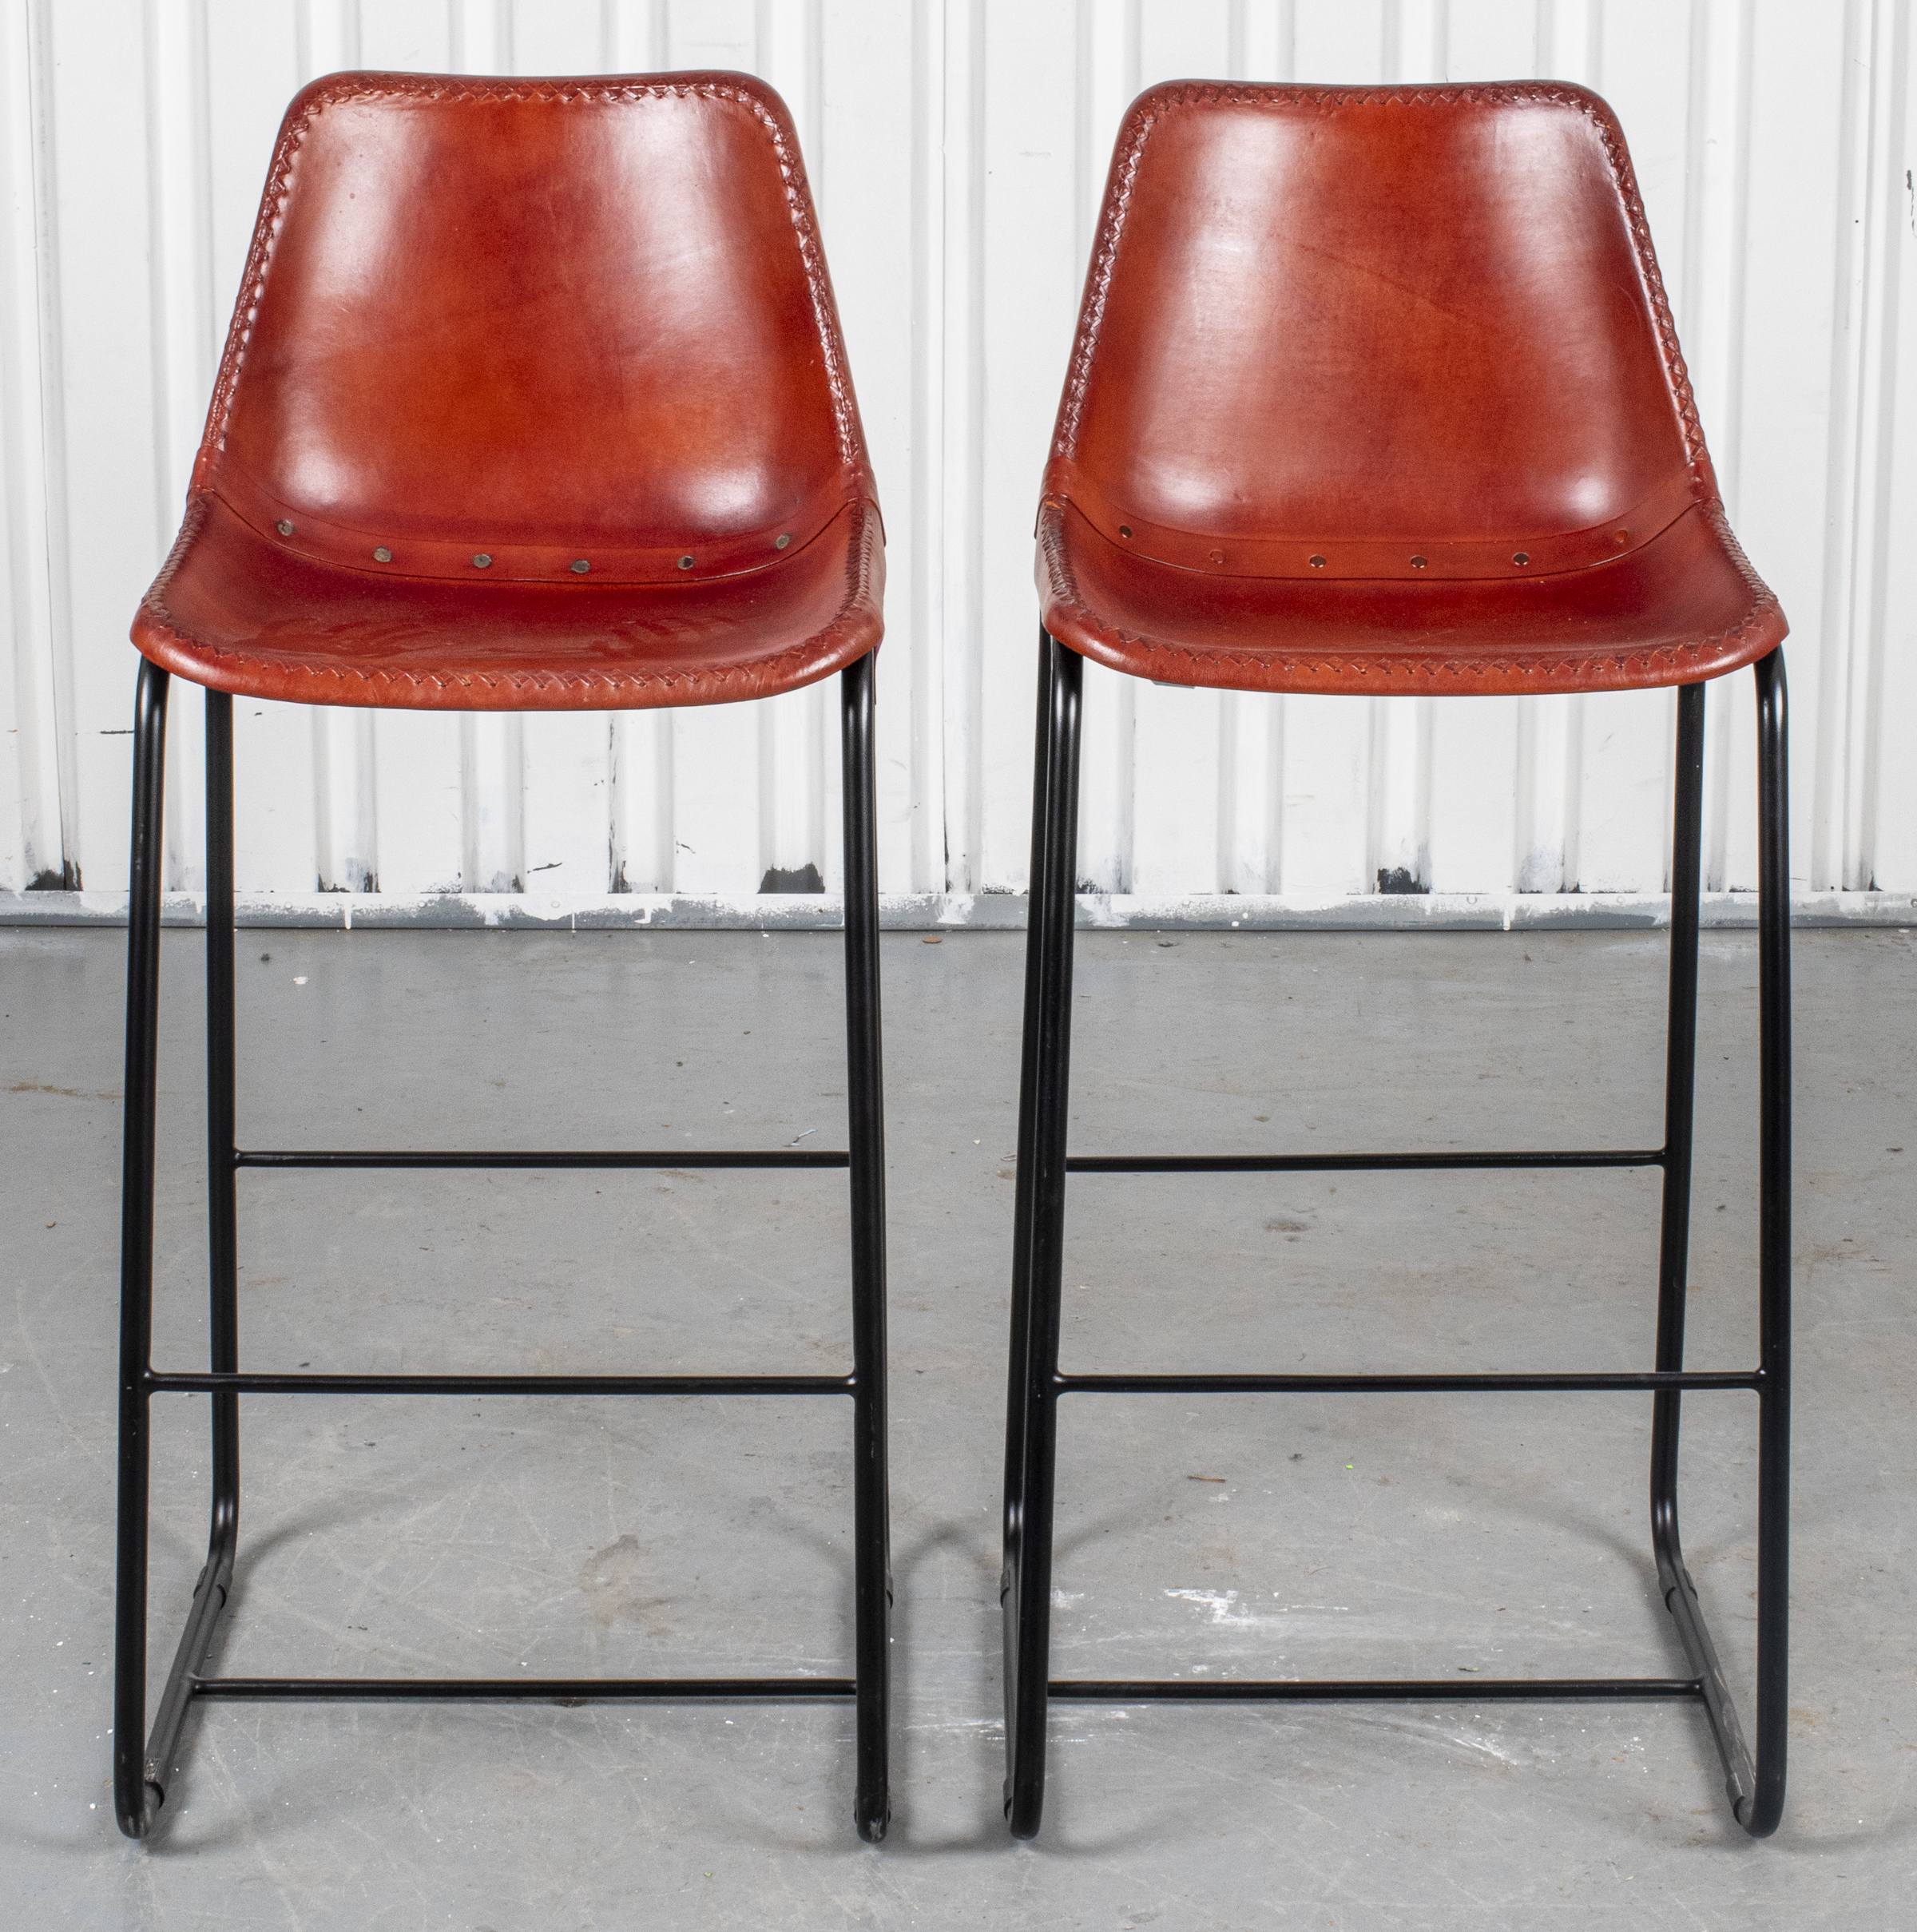 LEATHER UPHOLSTERED TALL STOOLS  3c4f10